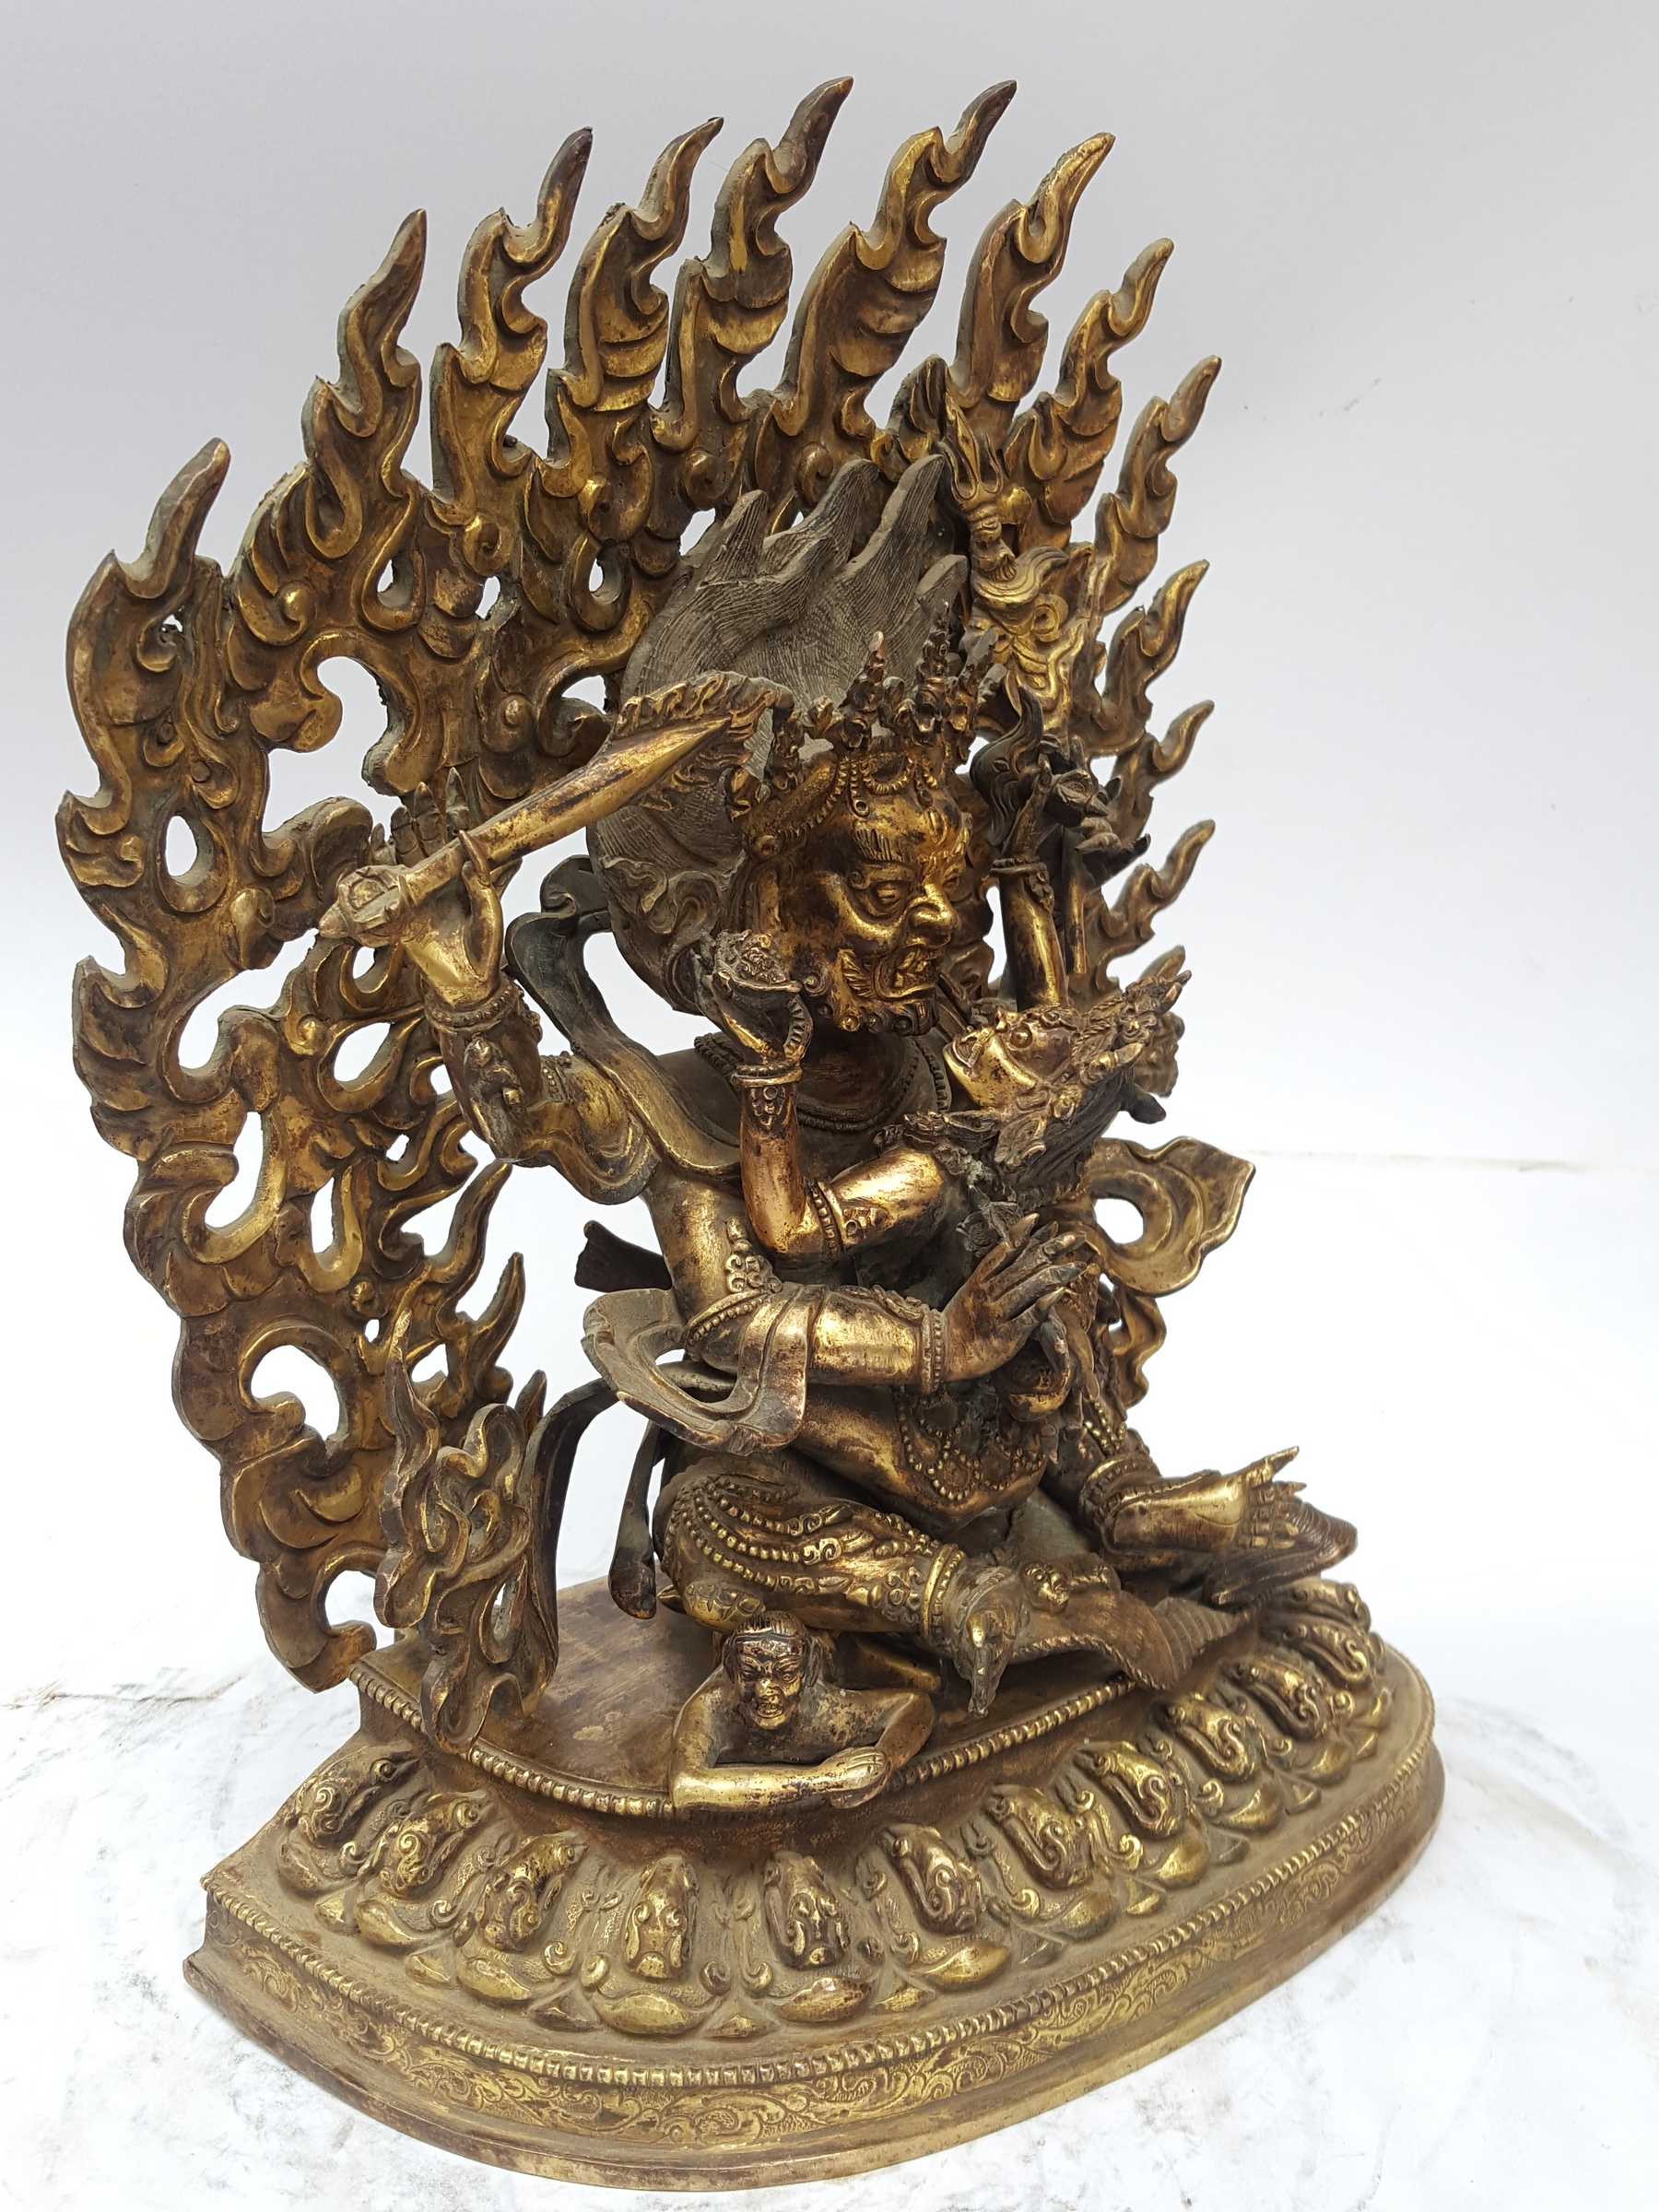 Statue Of Sitting Mahakal With Consort, shakti, Yab-yum full Fire Gold Plated, And antique Finishing